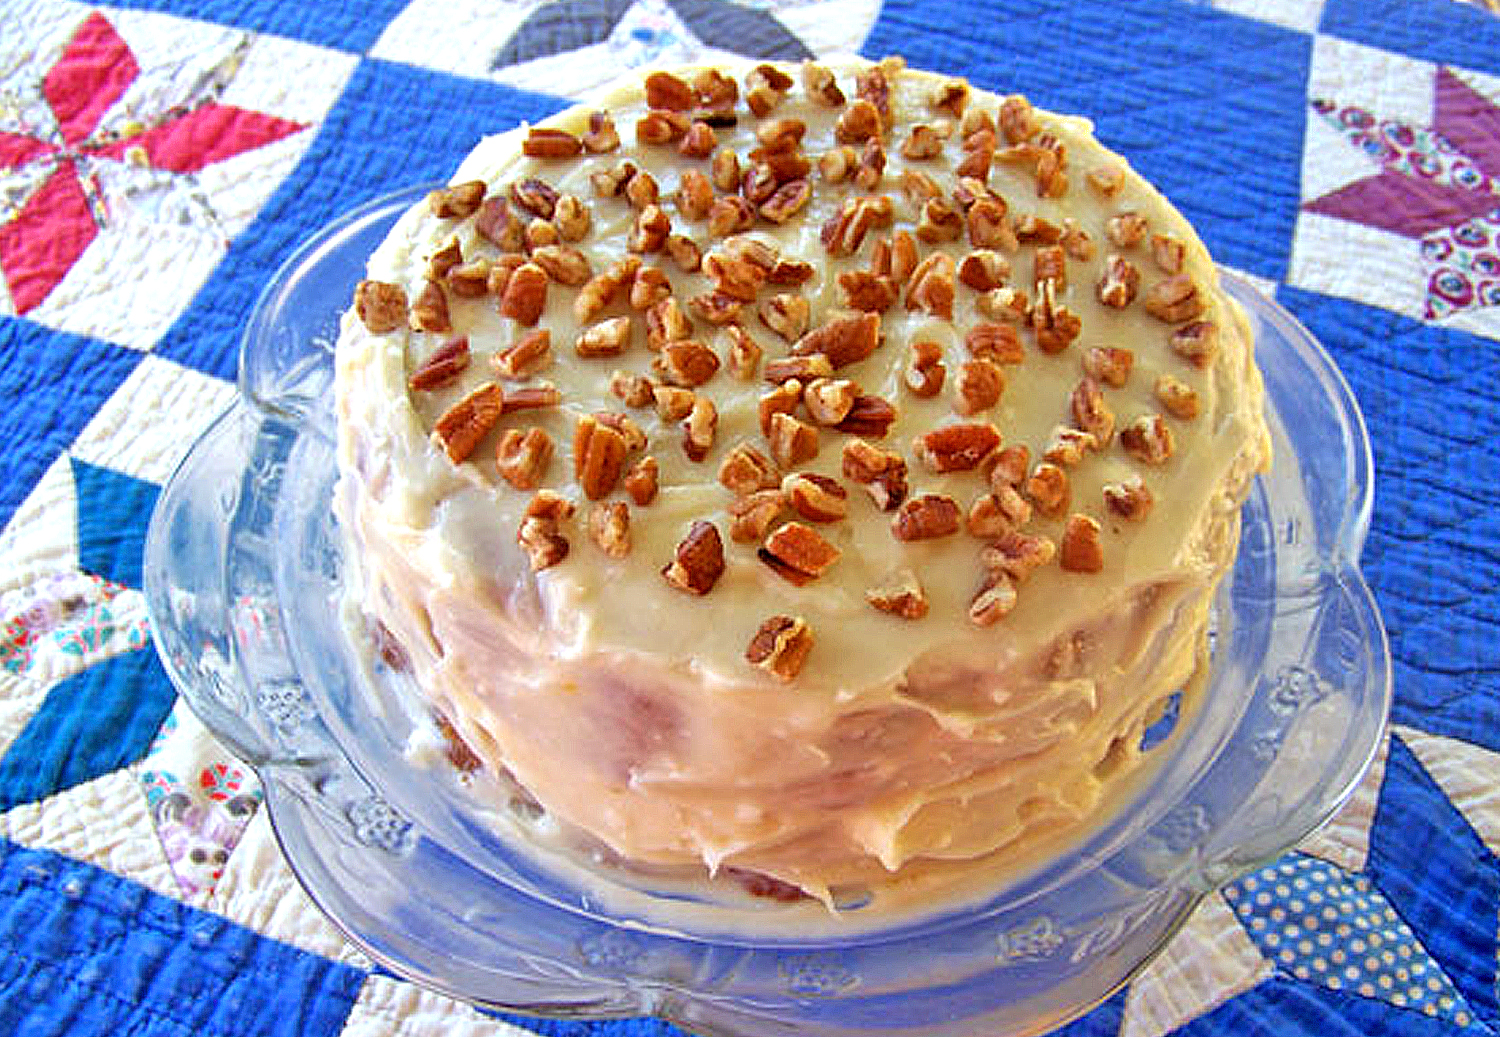 Pawpaw cake with frosting and nuts